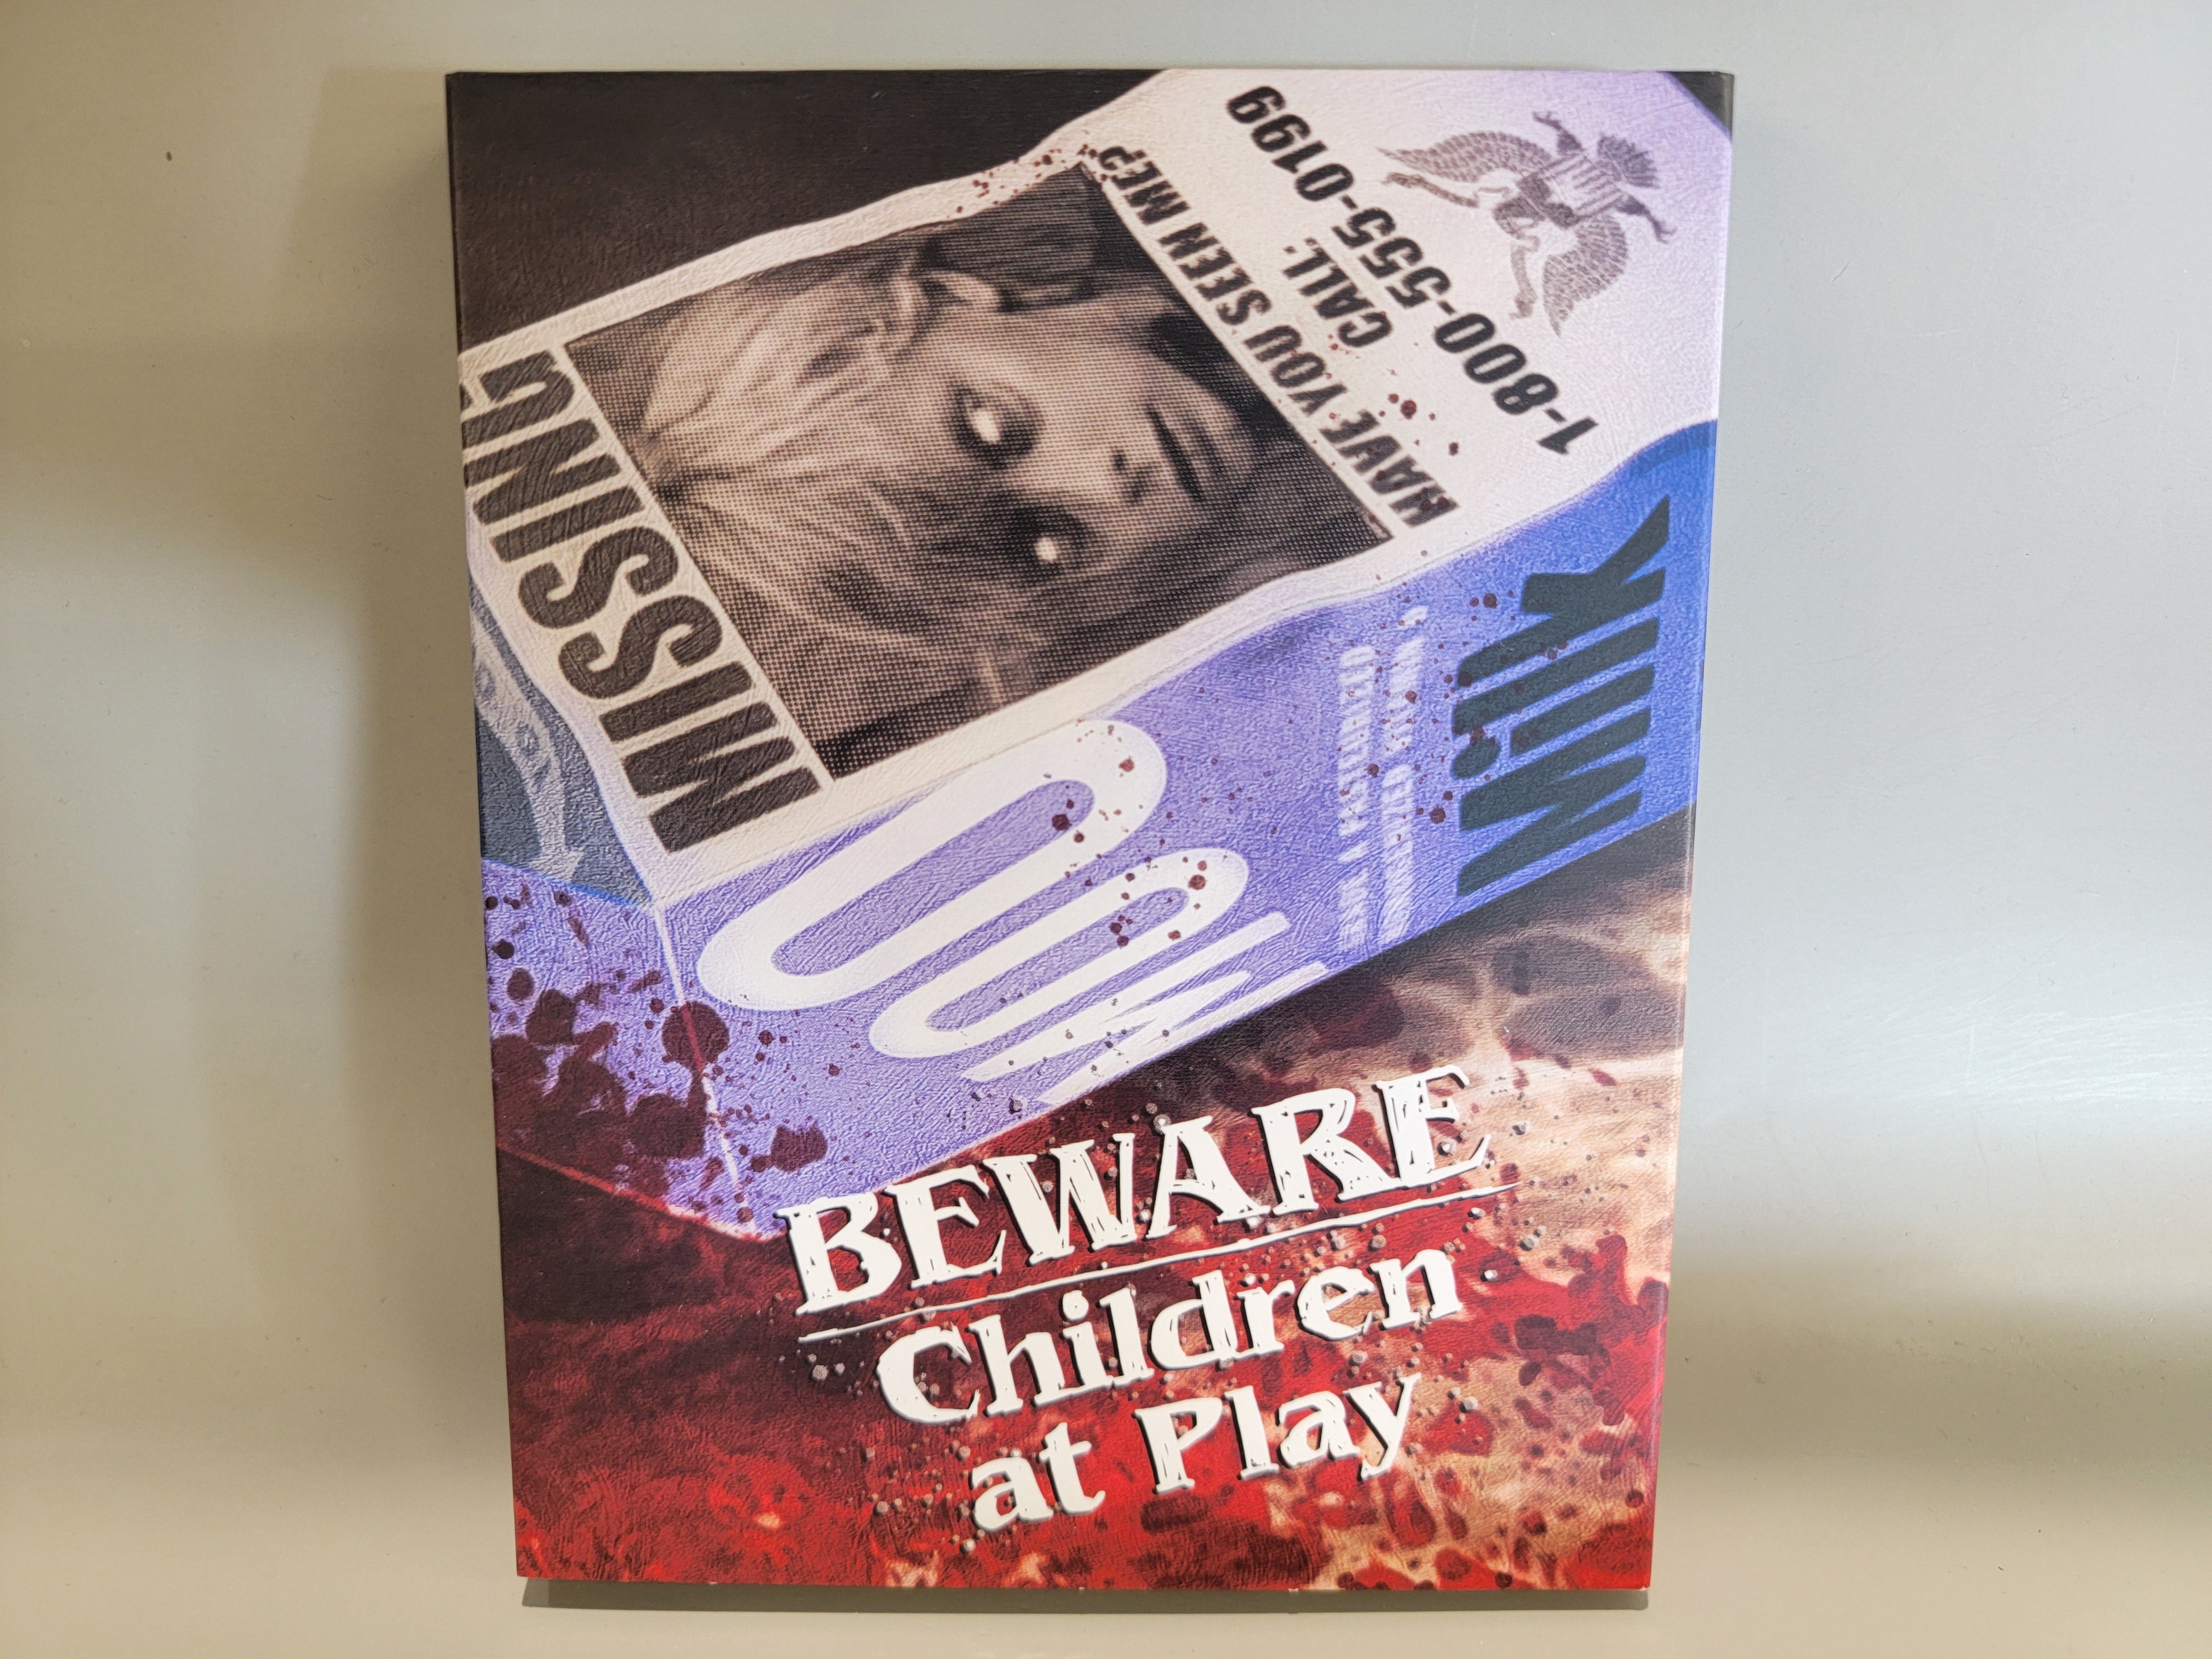 BEWARE CHILDREN AT PLAY (LIMITED EDITION) BLU-RAY [USED]